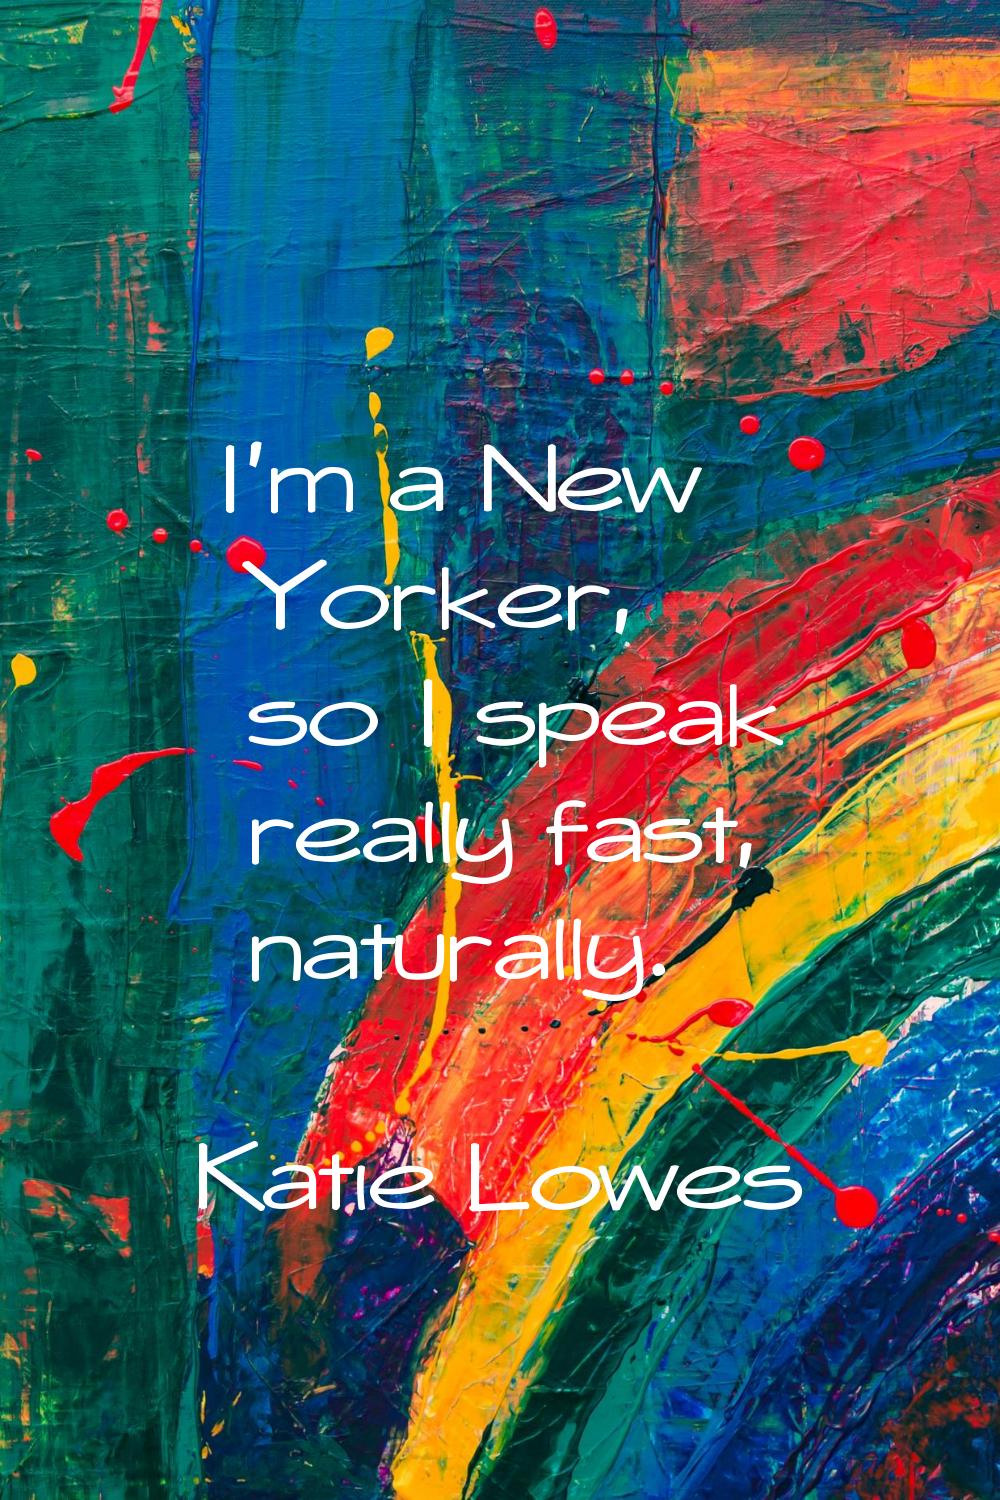 I'm a New Yorker, so I speak really fast, naturally.